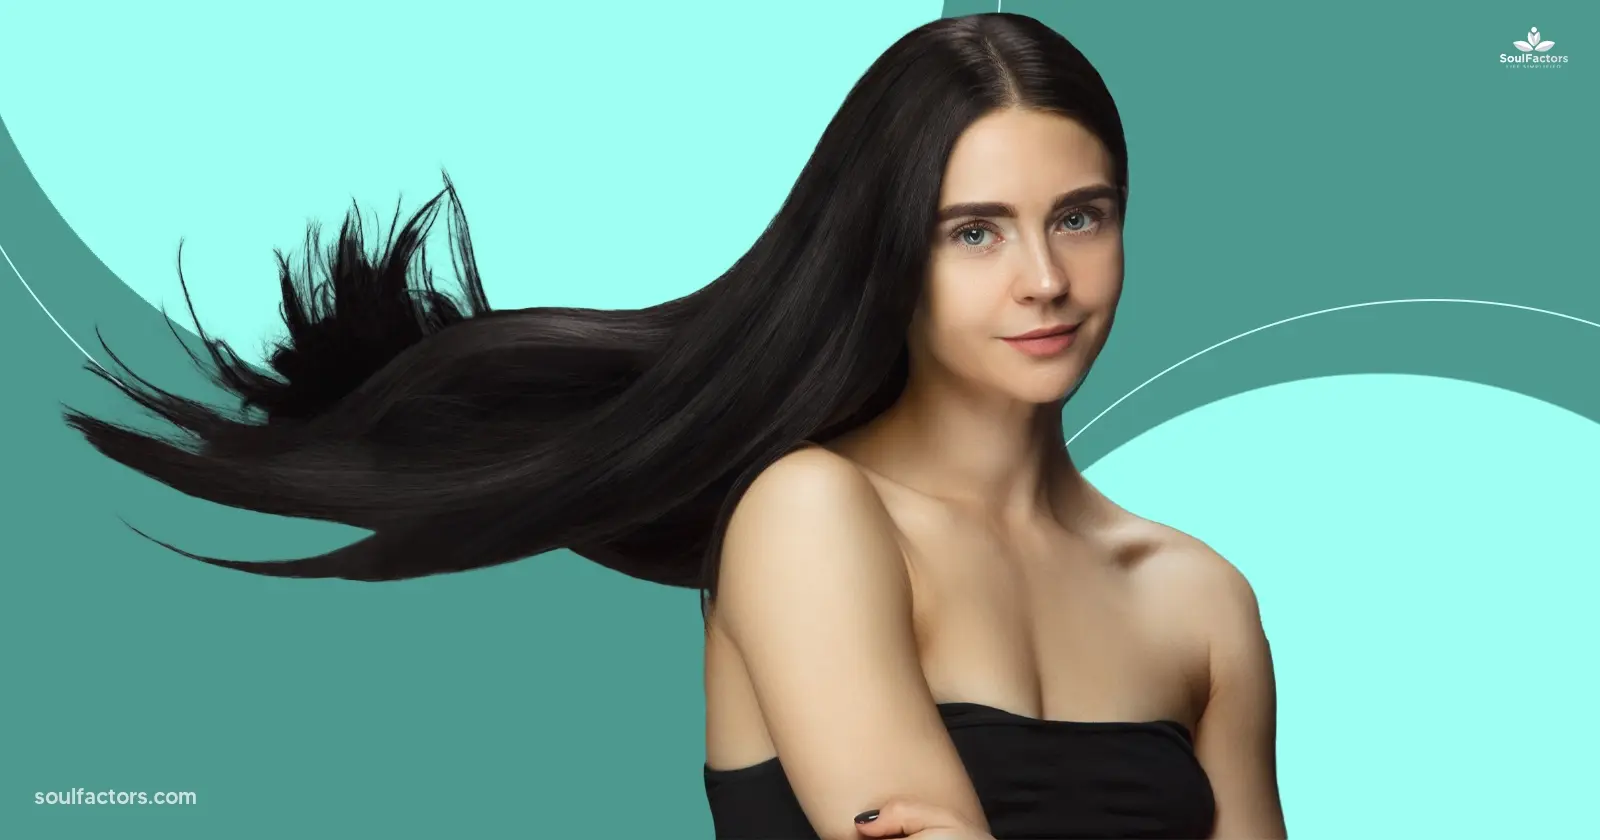 Liquid Hair Everything You Need To Know About The Trend- Feature